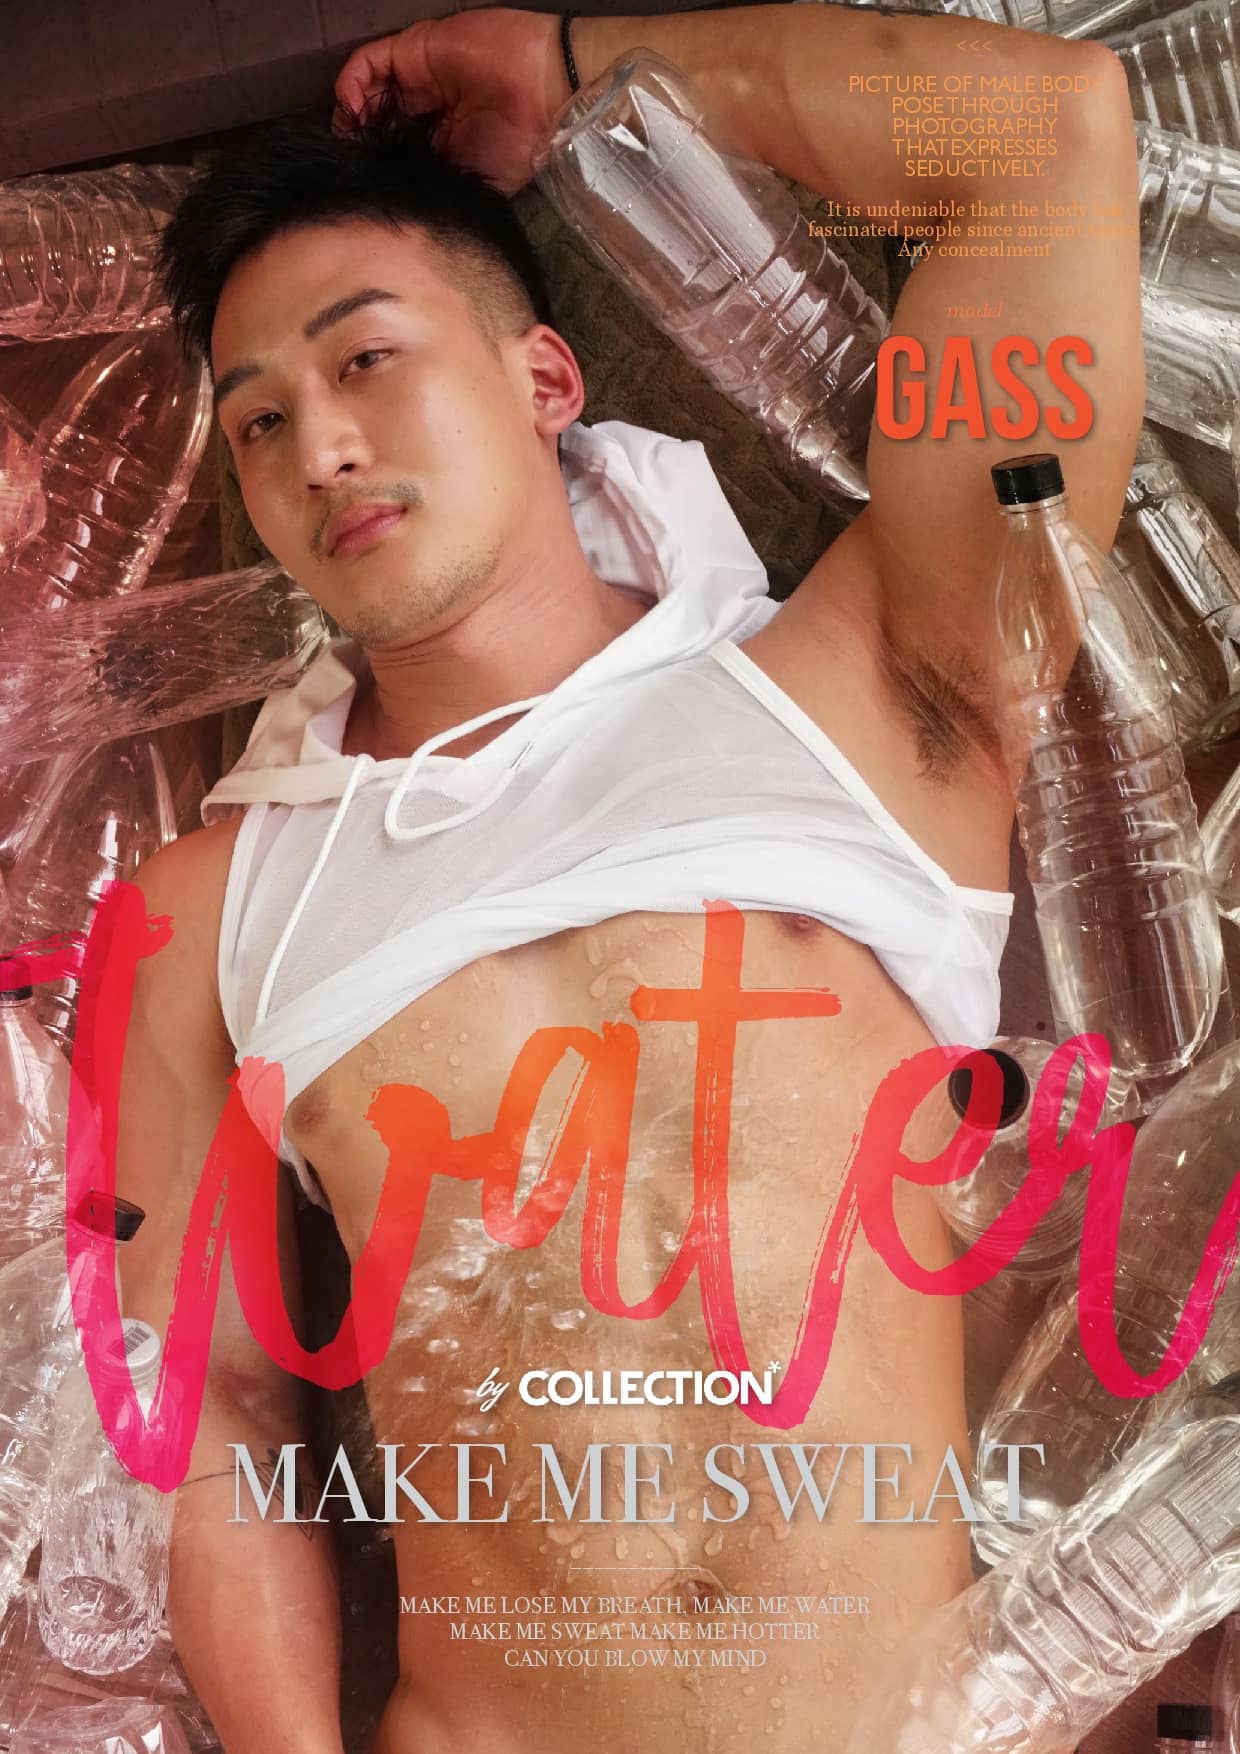 GASS by Collection Magazine ‖ R+【PHOTO+VIDEO】